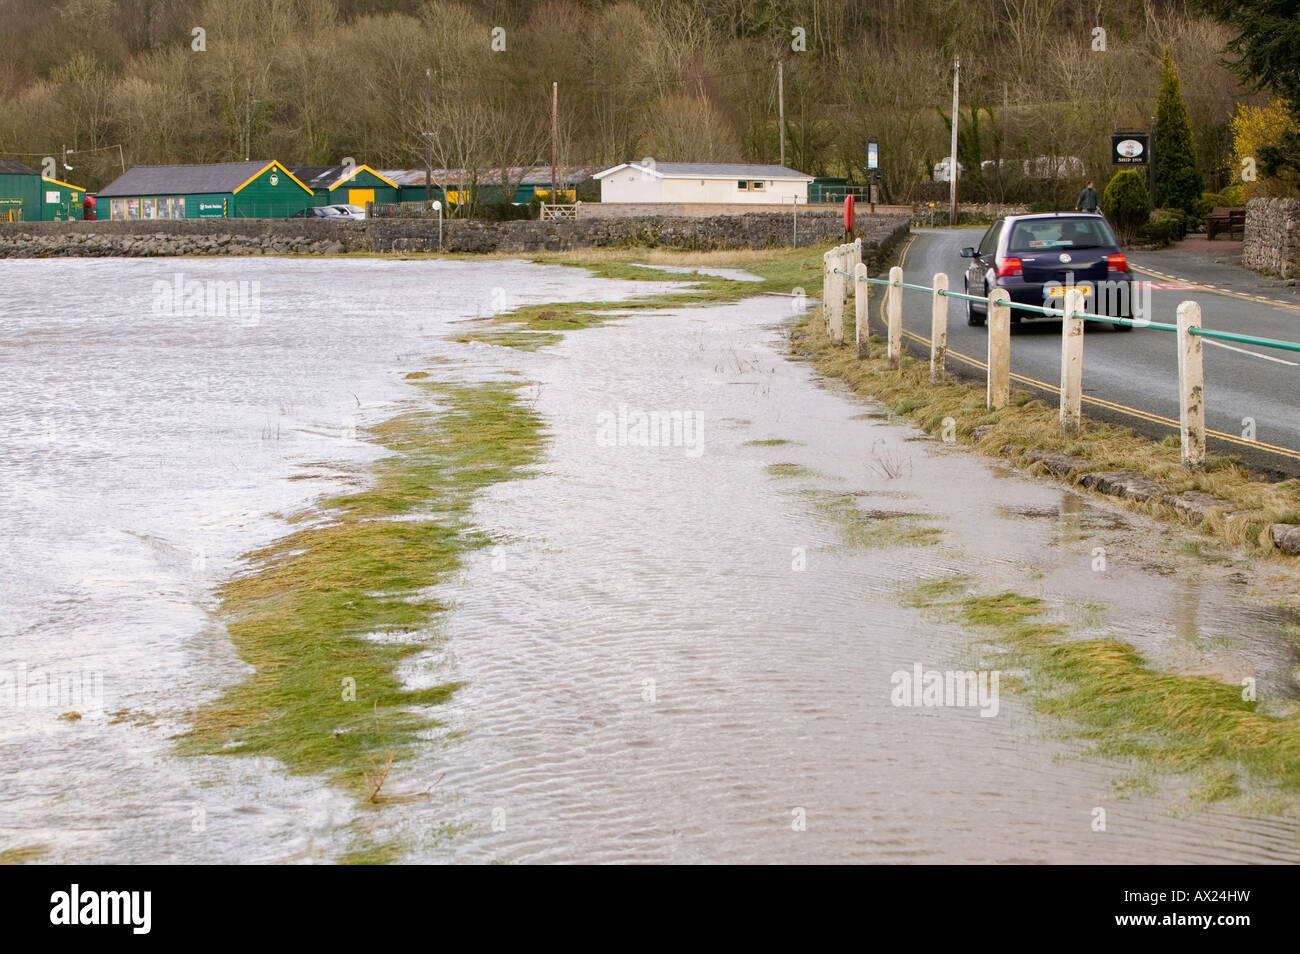 Flooding at Sandside near Arnside UK caused by high spring tides and gale force winds pushing the sea over onto the land Stock Photo